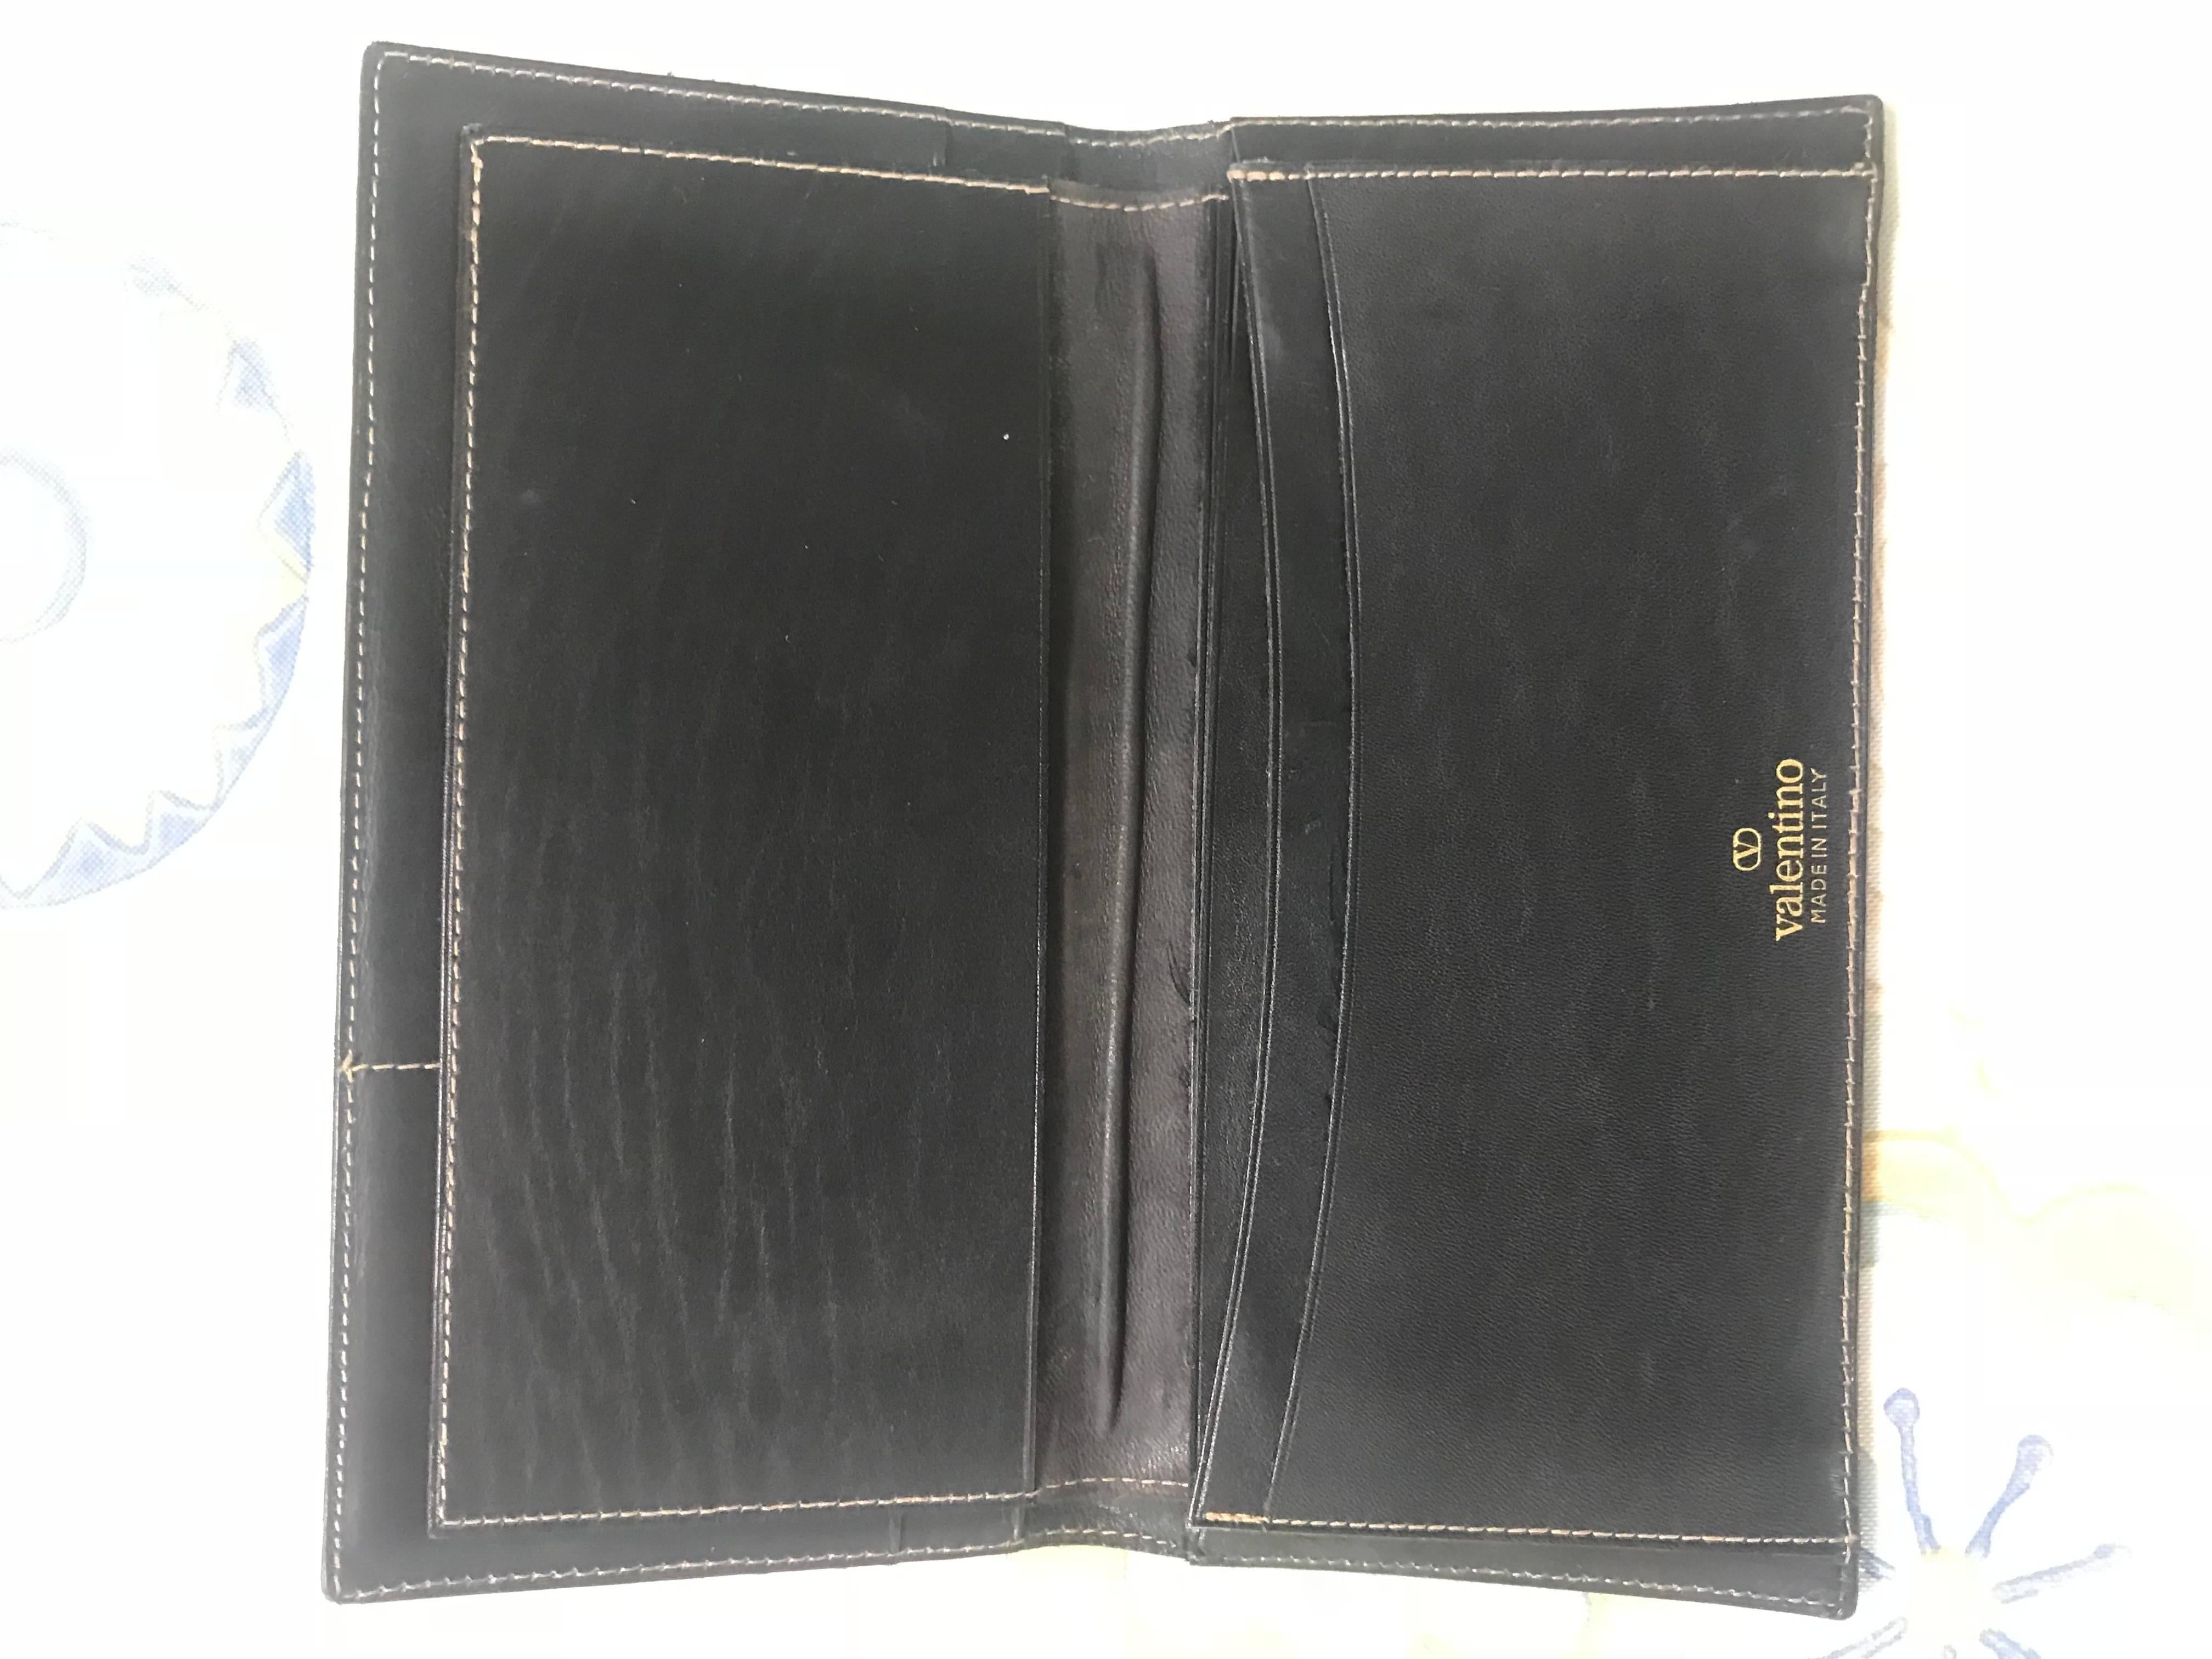 Women's or Men's Vintage Valentino black leather long wallet with beige stitches and V logo.